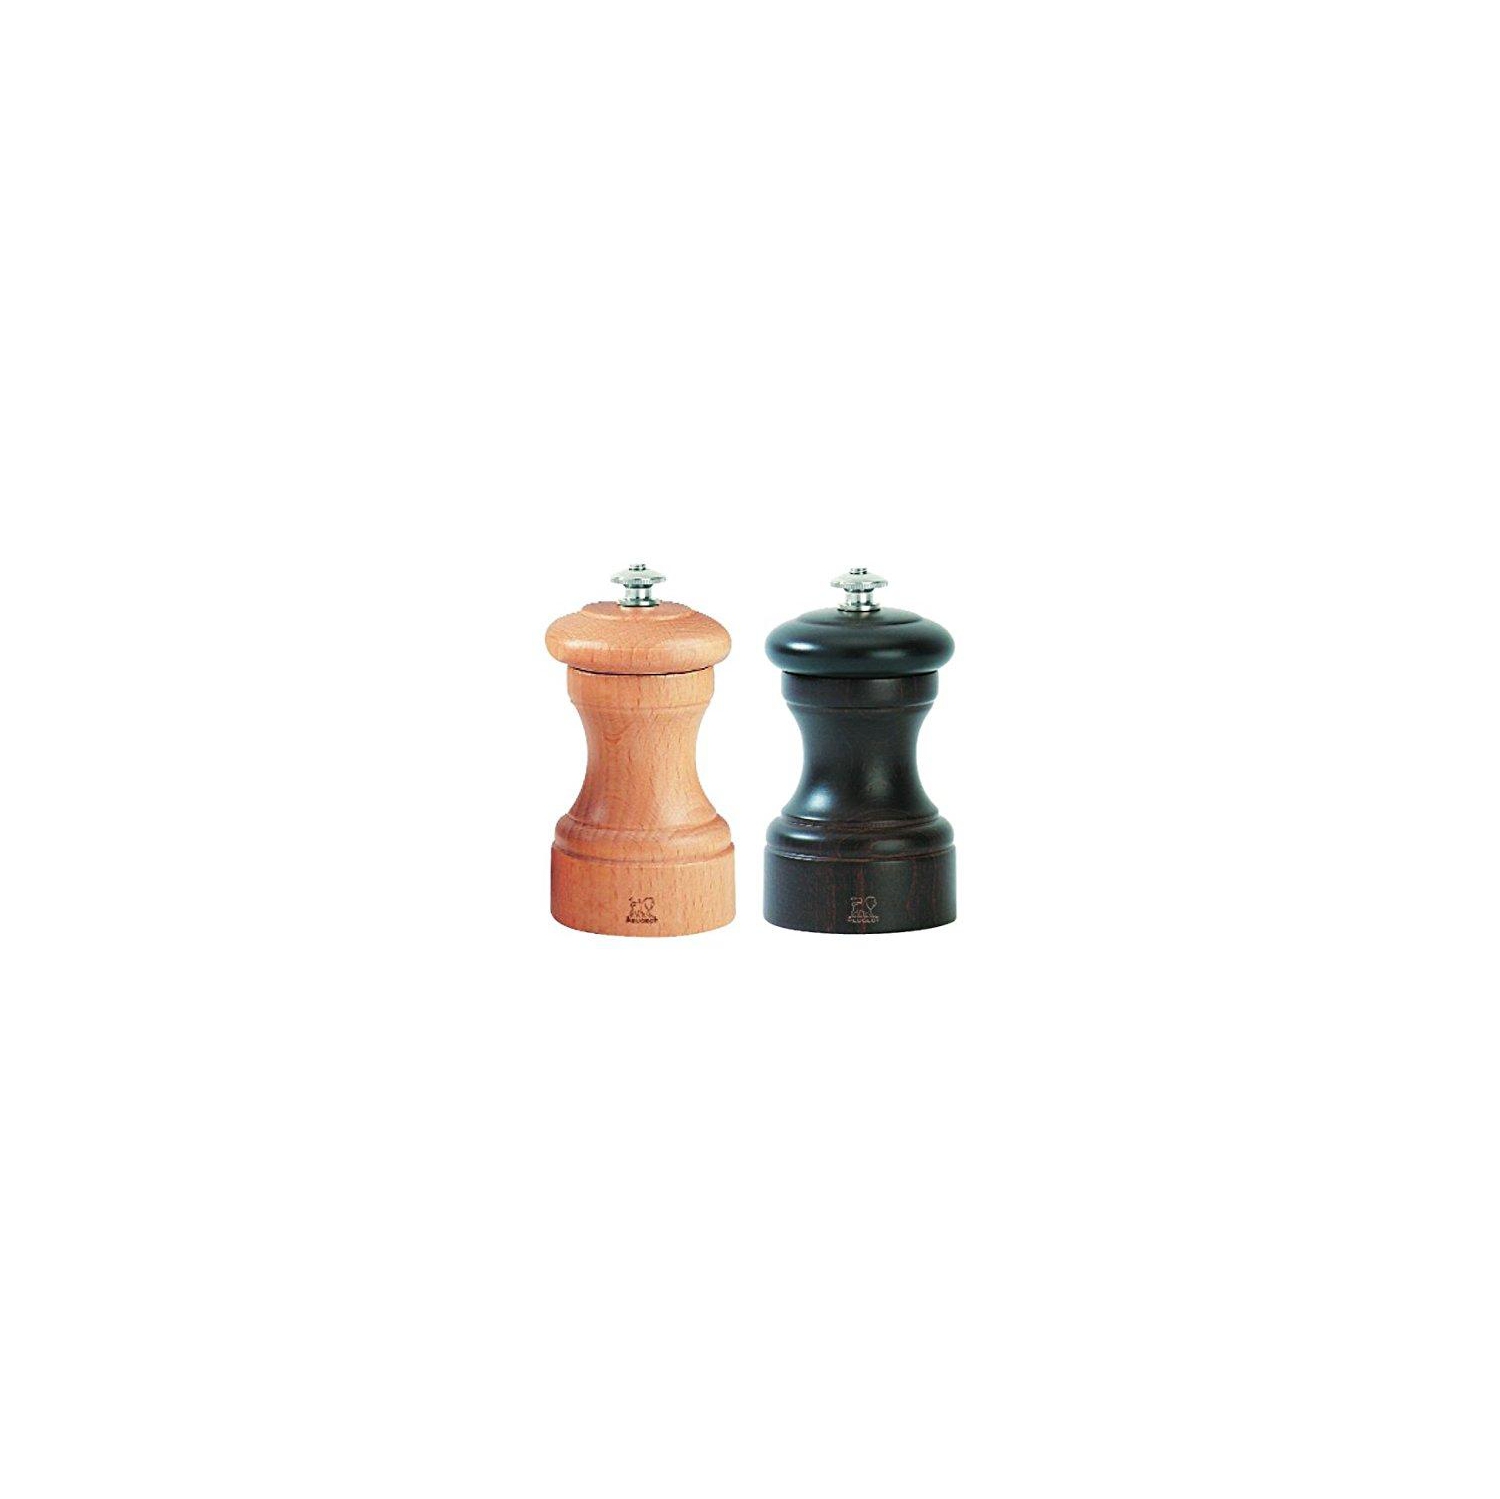 Peugeot - Bistro Pepper Mill And Salt Mill Set 4 Inch (Chocolate And Natural)